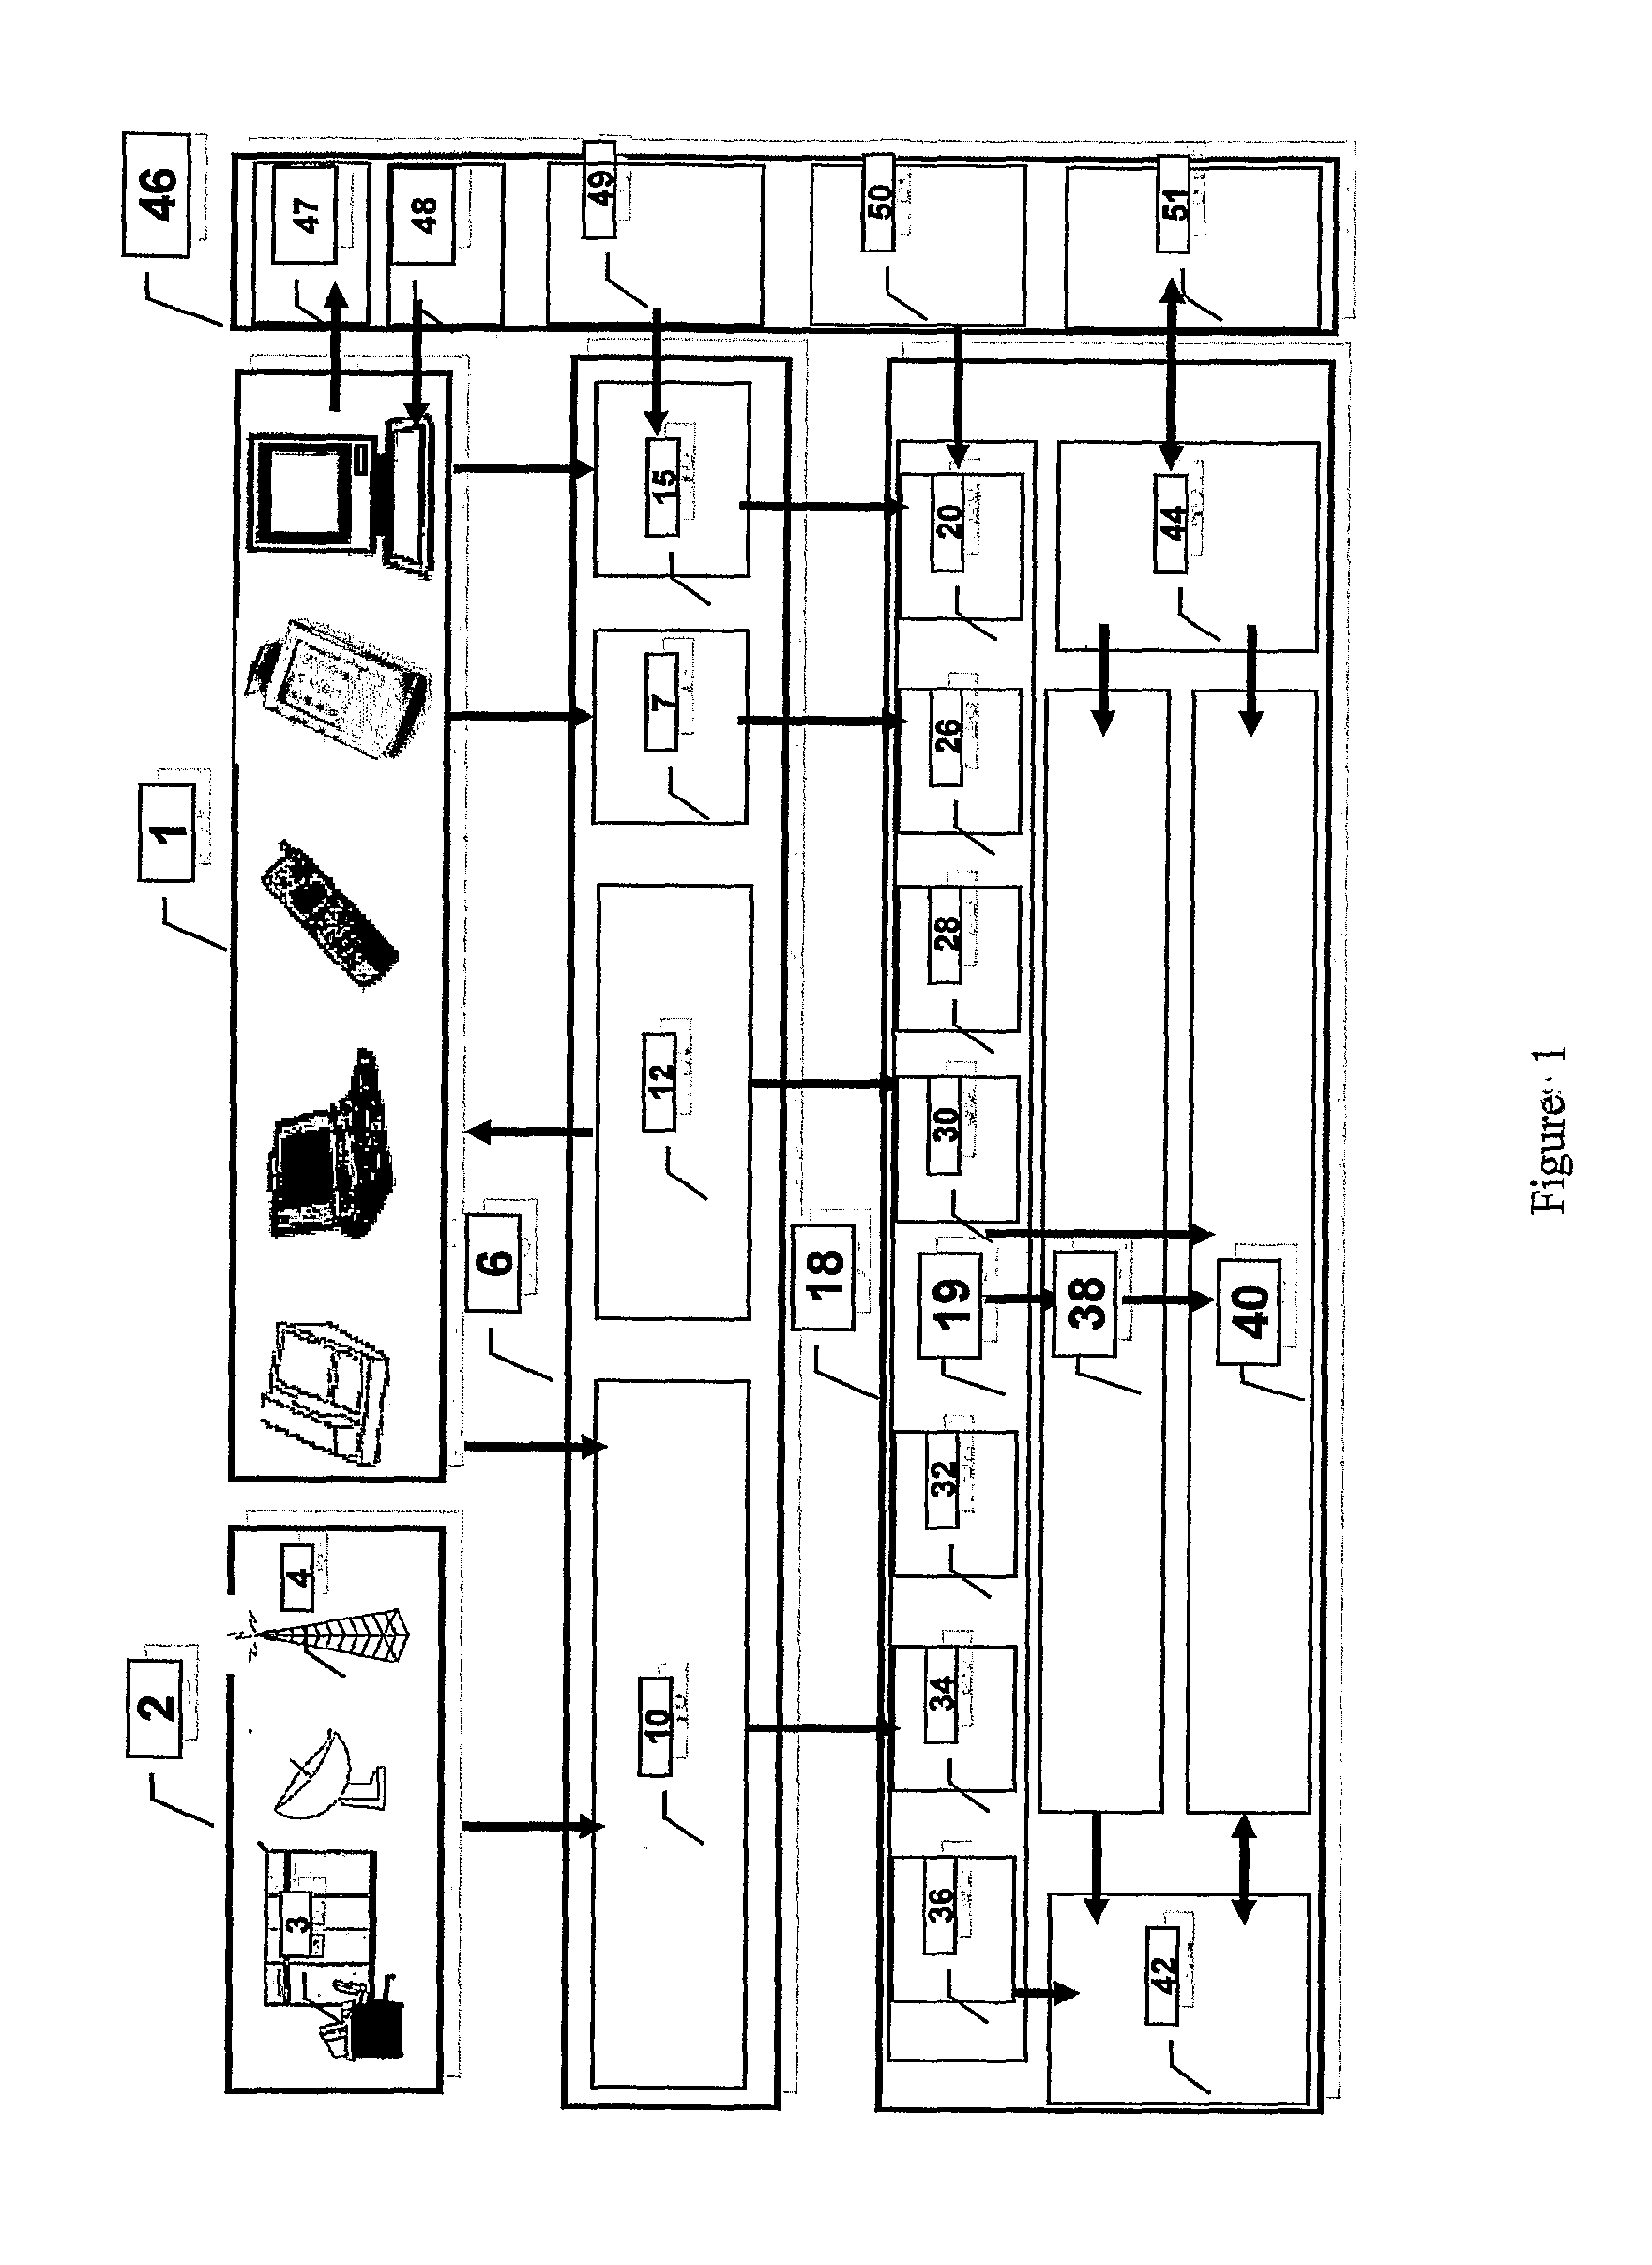 Method and System for Managing Customer Relations